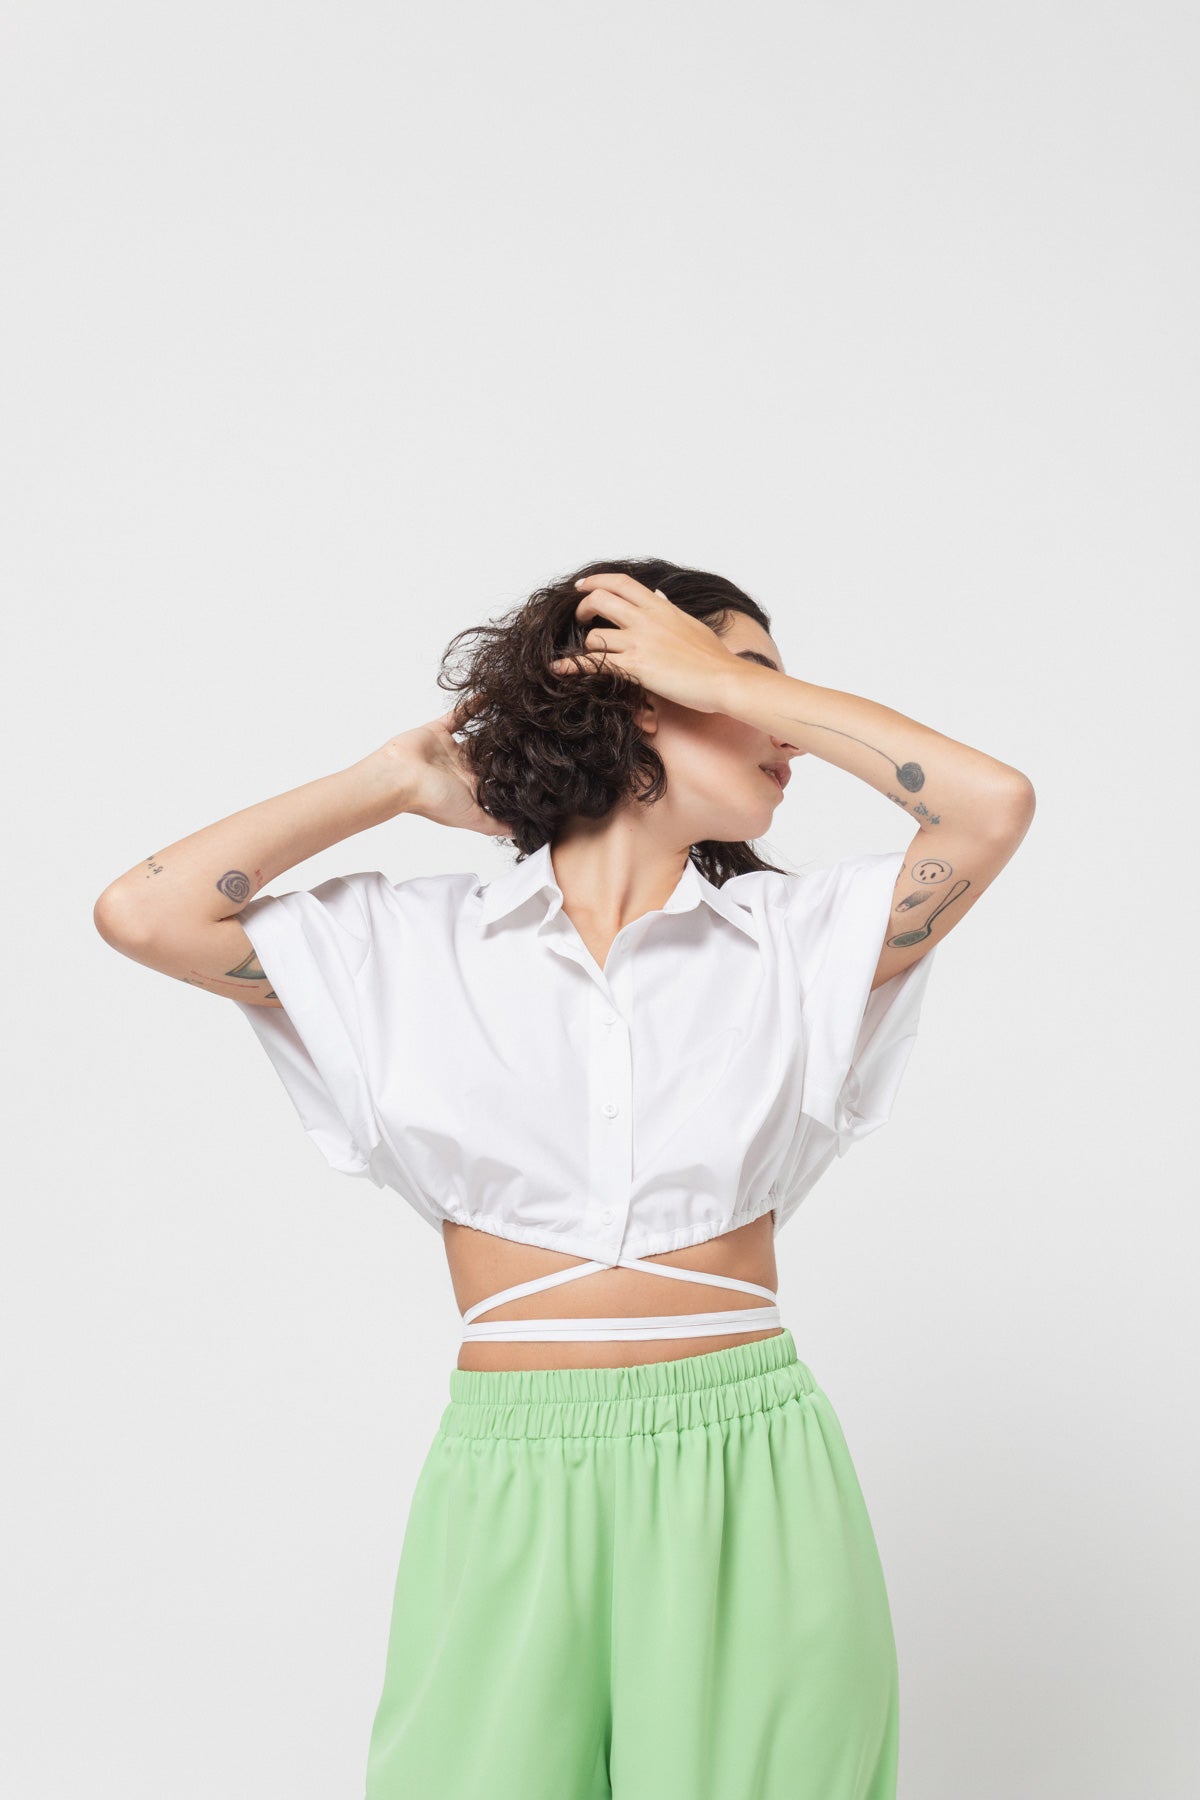 The White Cropped Wrap Shirt